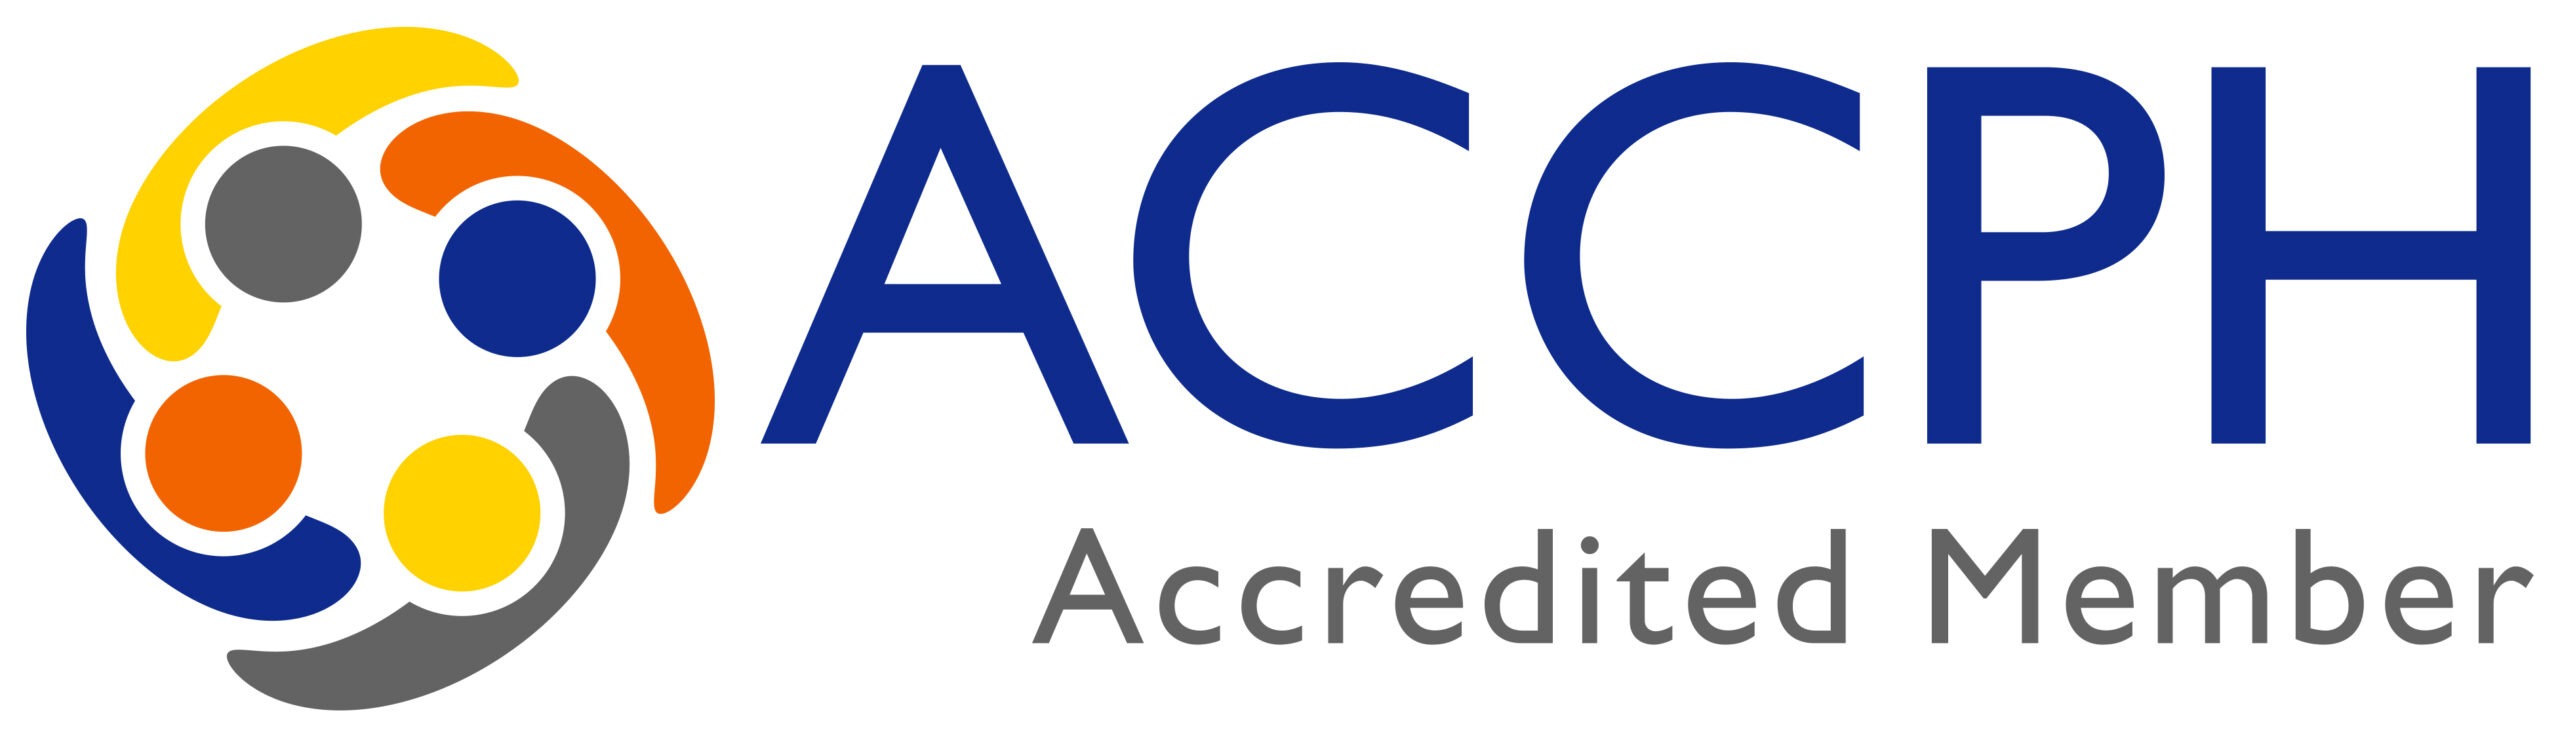 ACCPH Profile for Yvonne, Accredited Member.